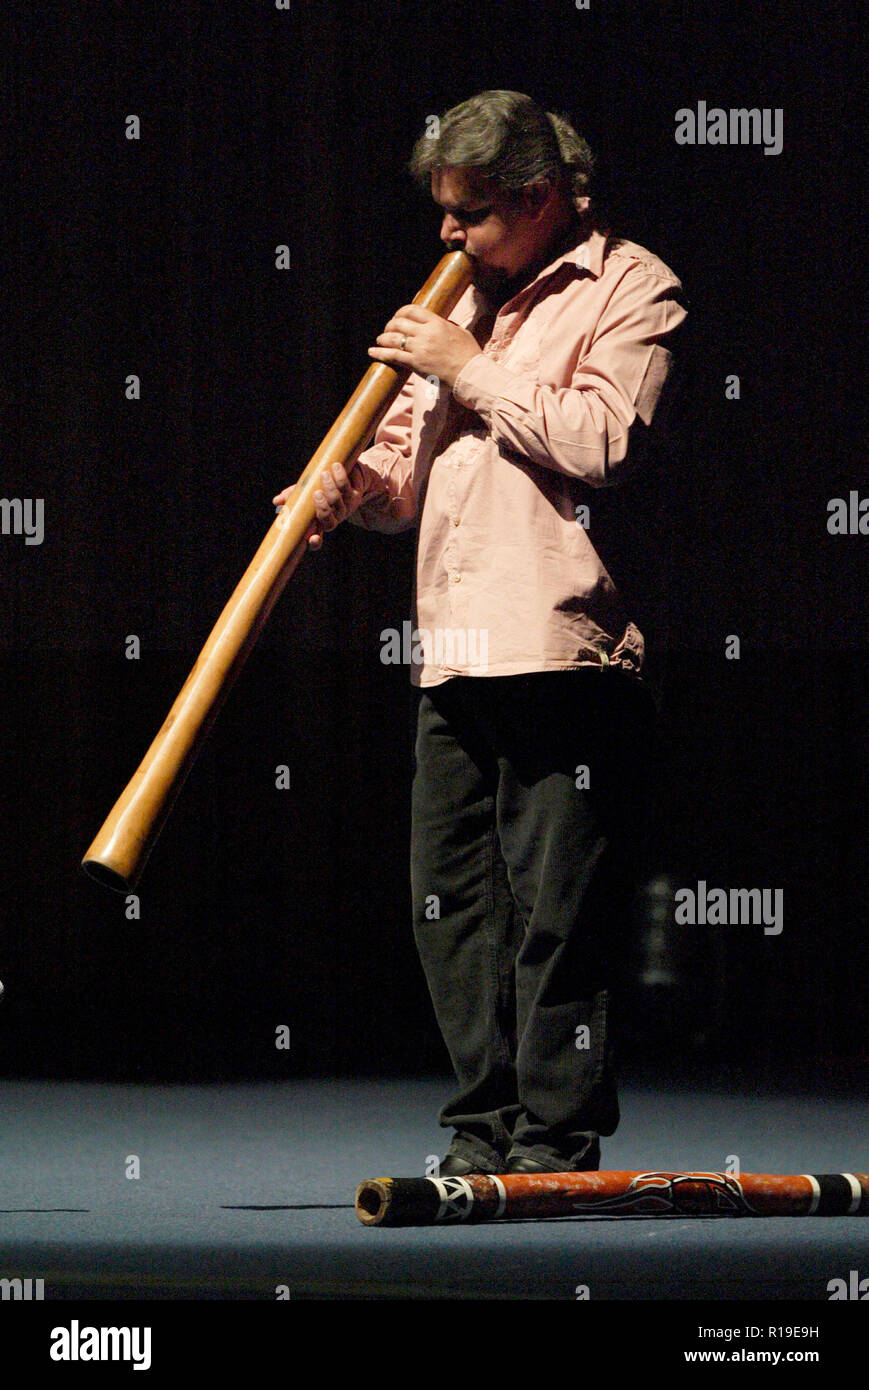 Matthew Doyle, didgeridoo player Tokiko Kato, Japanese singer and Goodwill Ambassador for the United Nations Environment Programme, performing live in concert at Sydney Congress Hall. Sydney, Australia. 20.08.08. Stock Photo